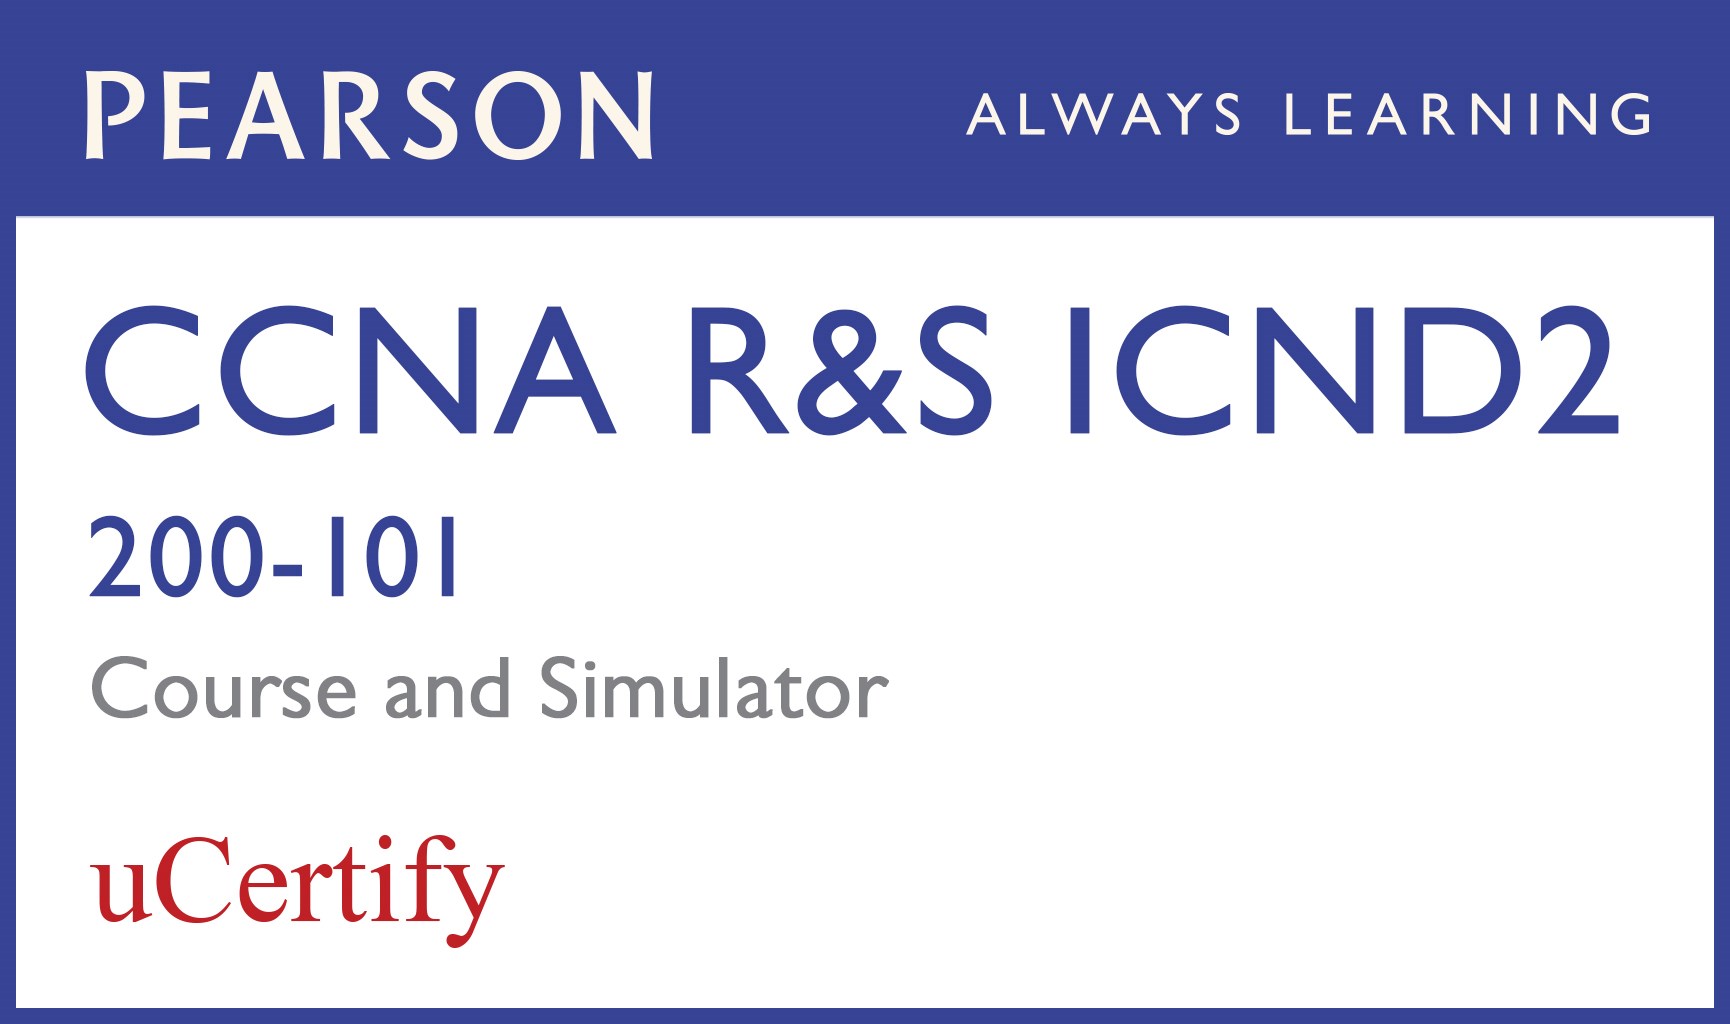 CCNA R&S ICND2 200-101 Pearson uCertify Course and Network Simulator Bundle